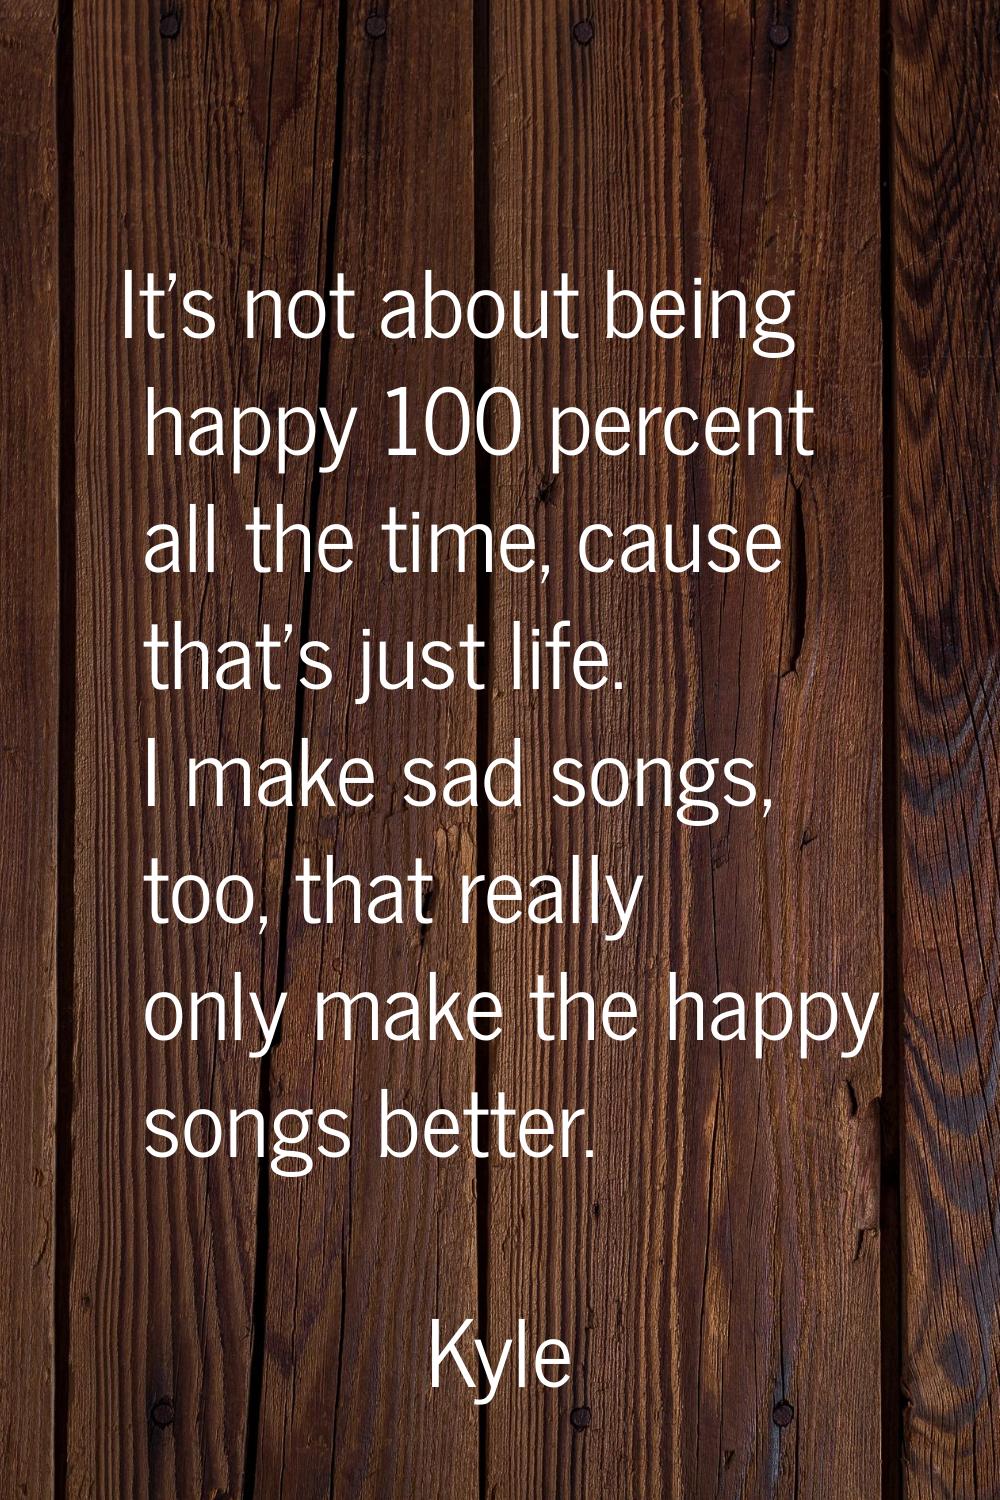 It's not about being happy 100 percent all the time, cause that's just life. I make sad songs, too,